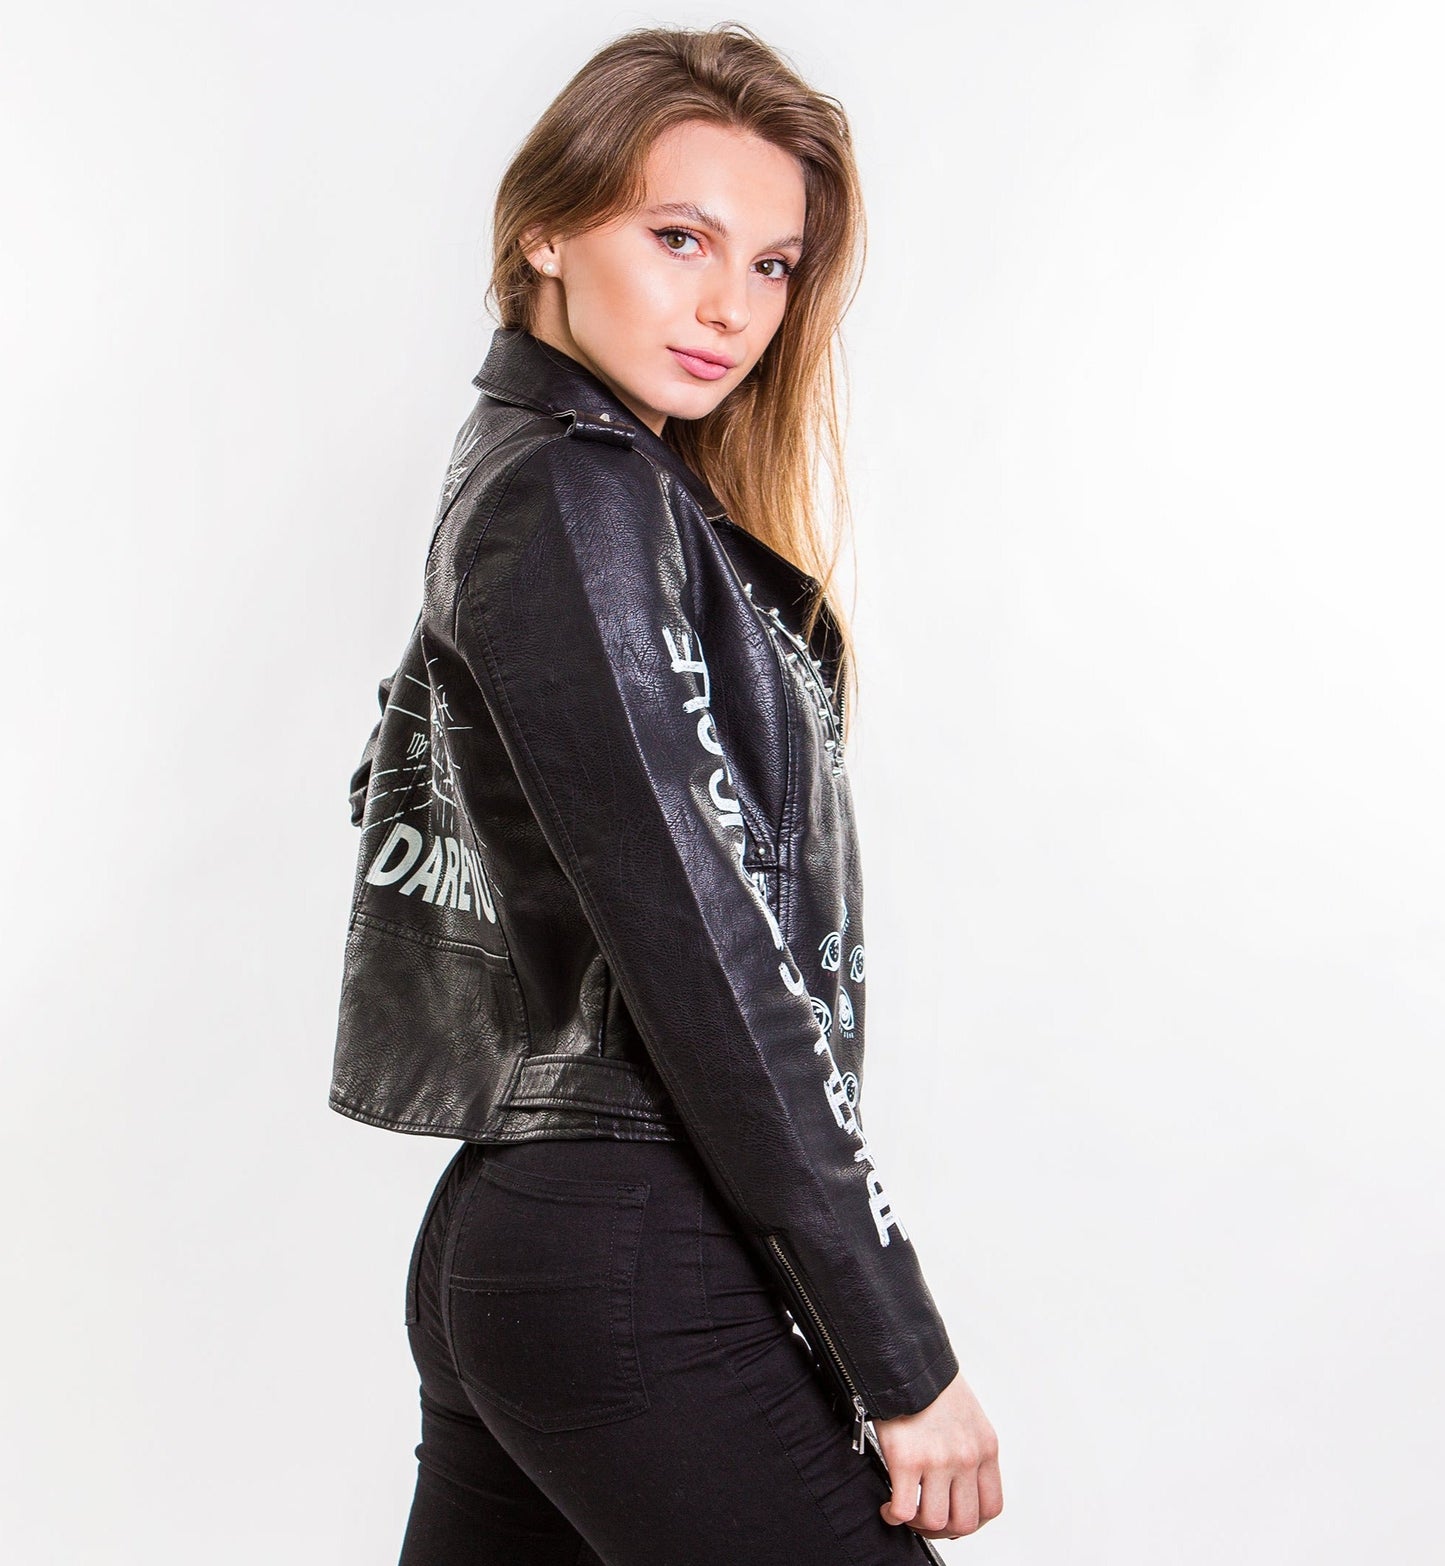 Women’s leather jacket DARE YOU - Jackets non-customizable